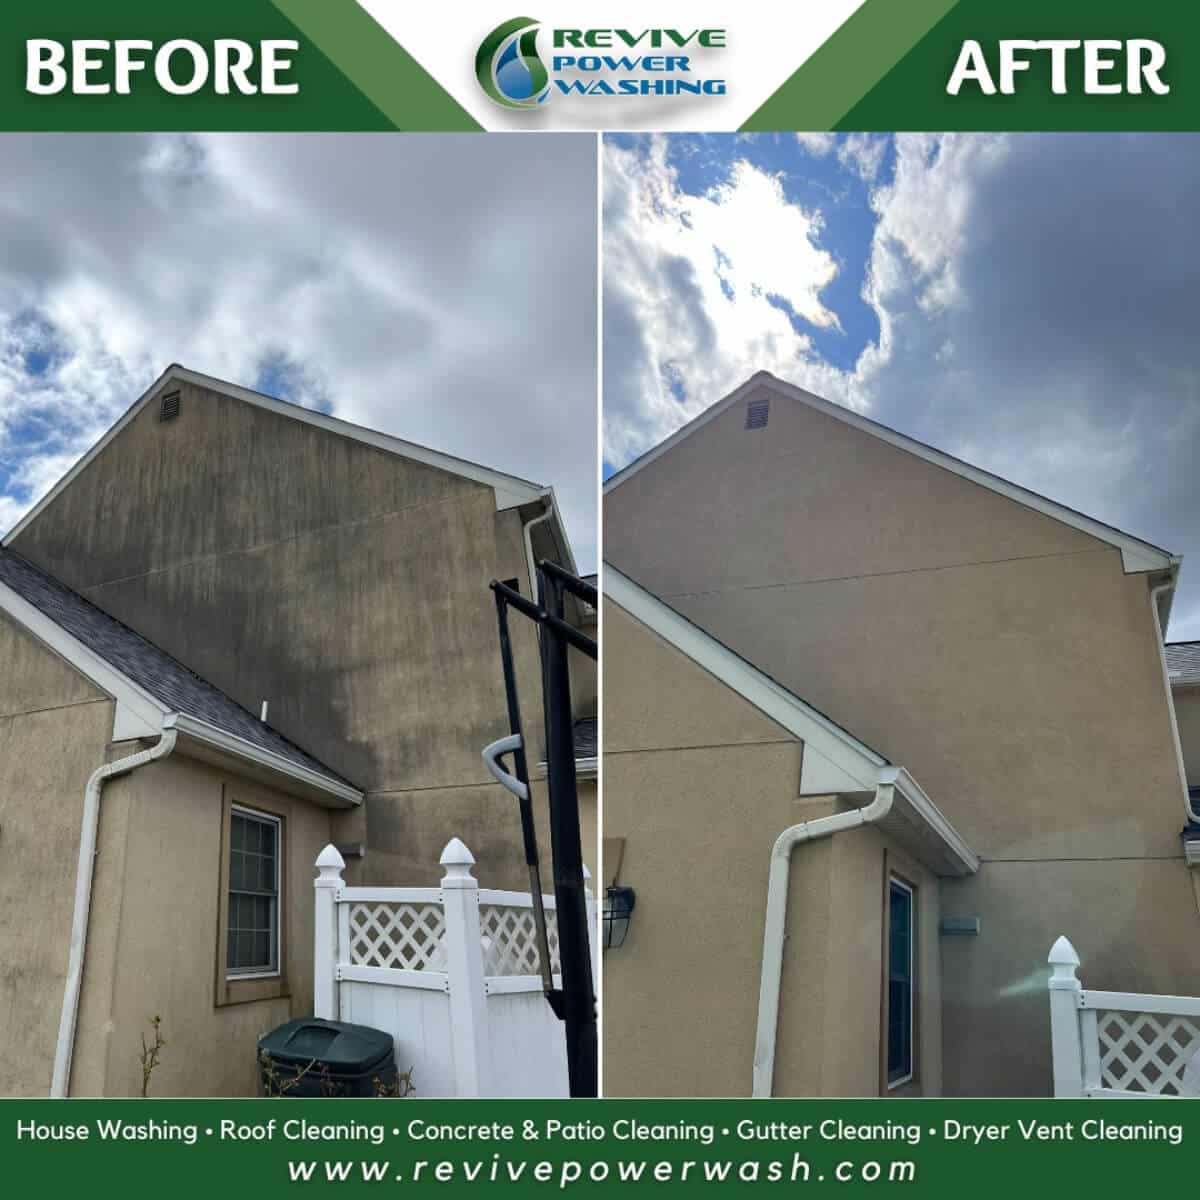 before and after comparison of house washing service in allentown pa